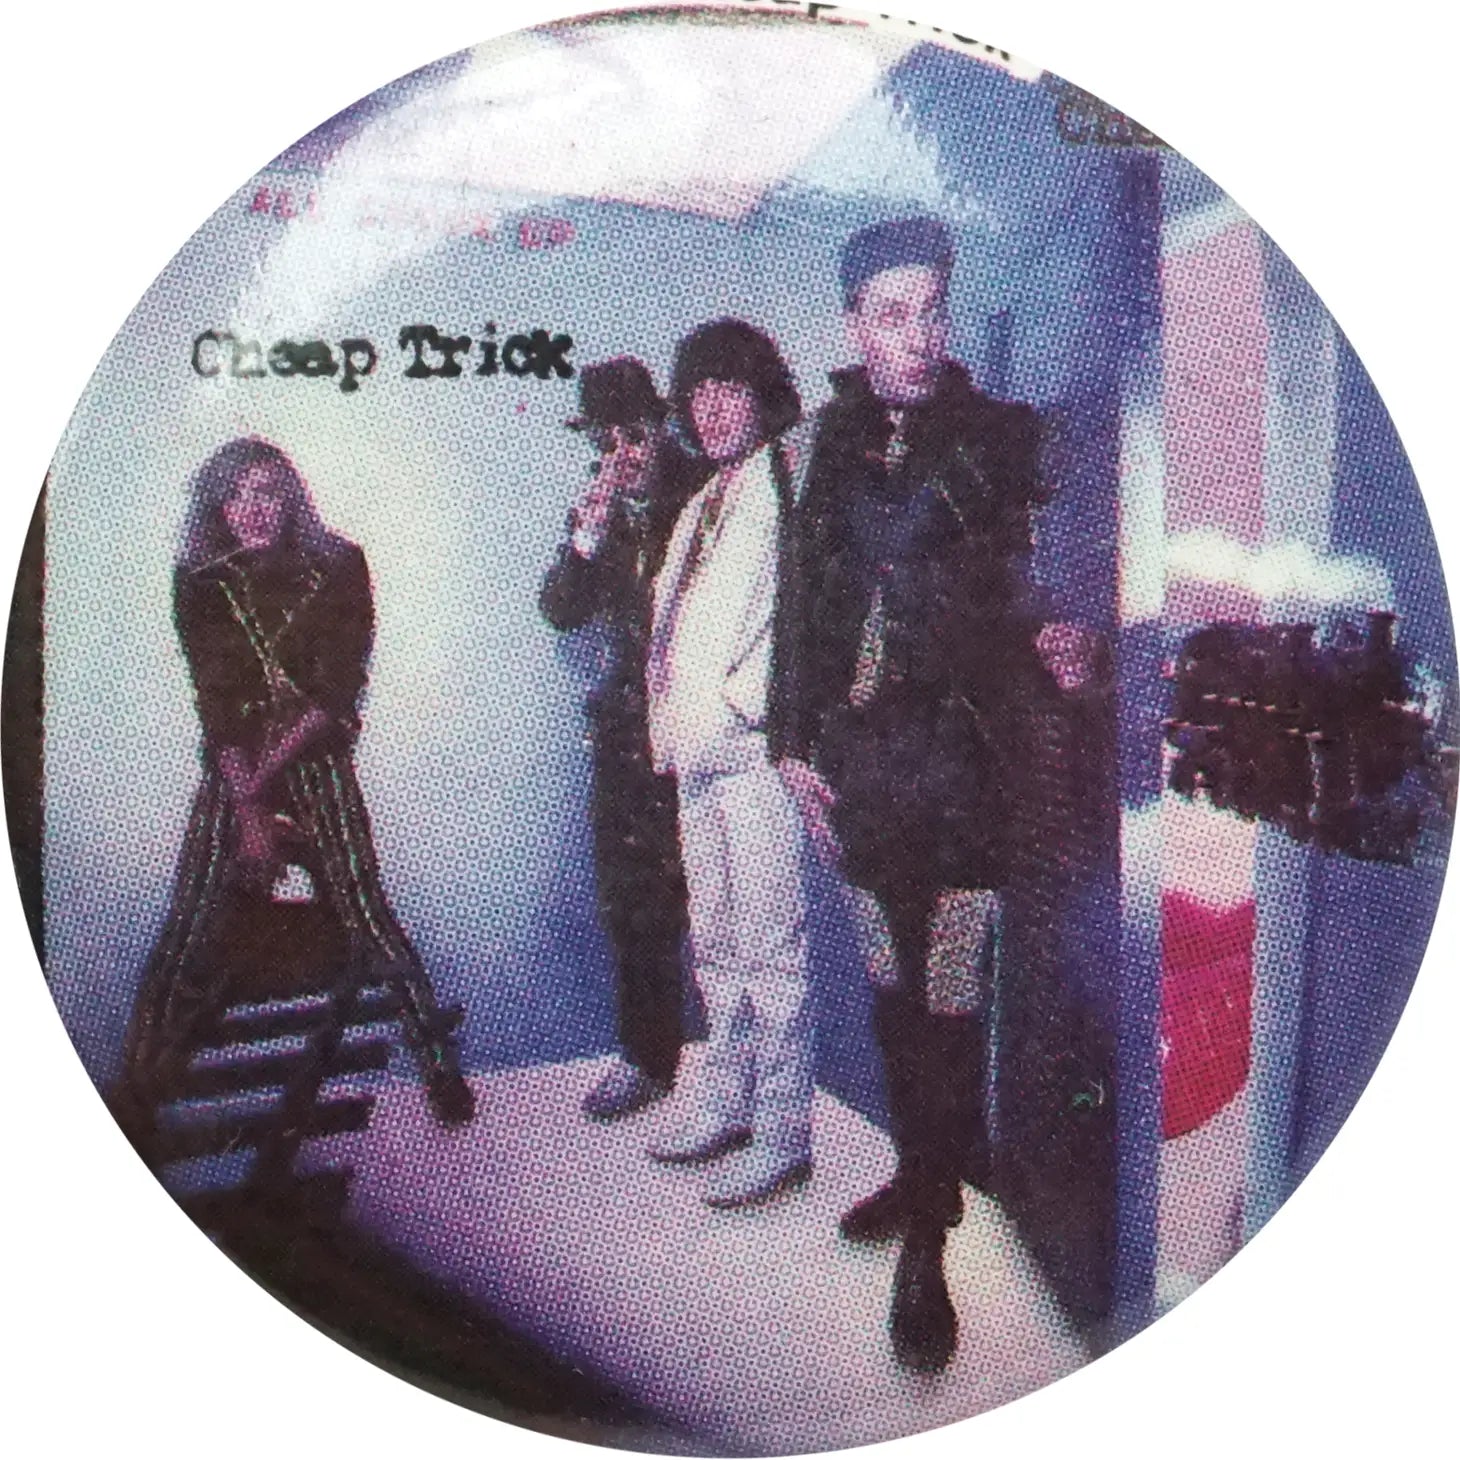 1.25” round pinback button of Cheap Trick’s album cover for All Shook Up